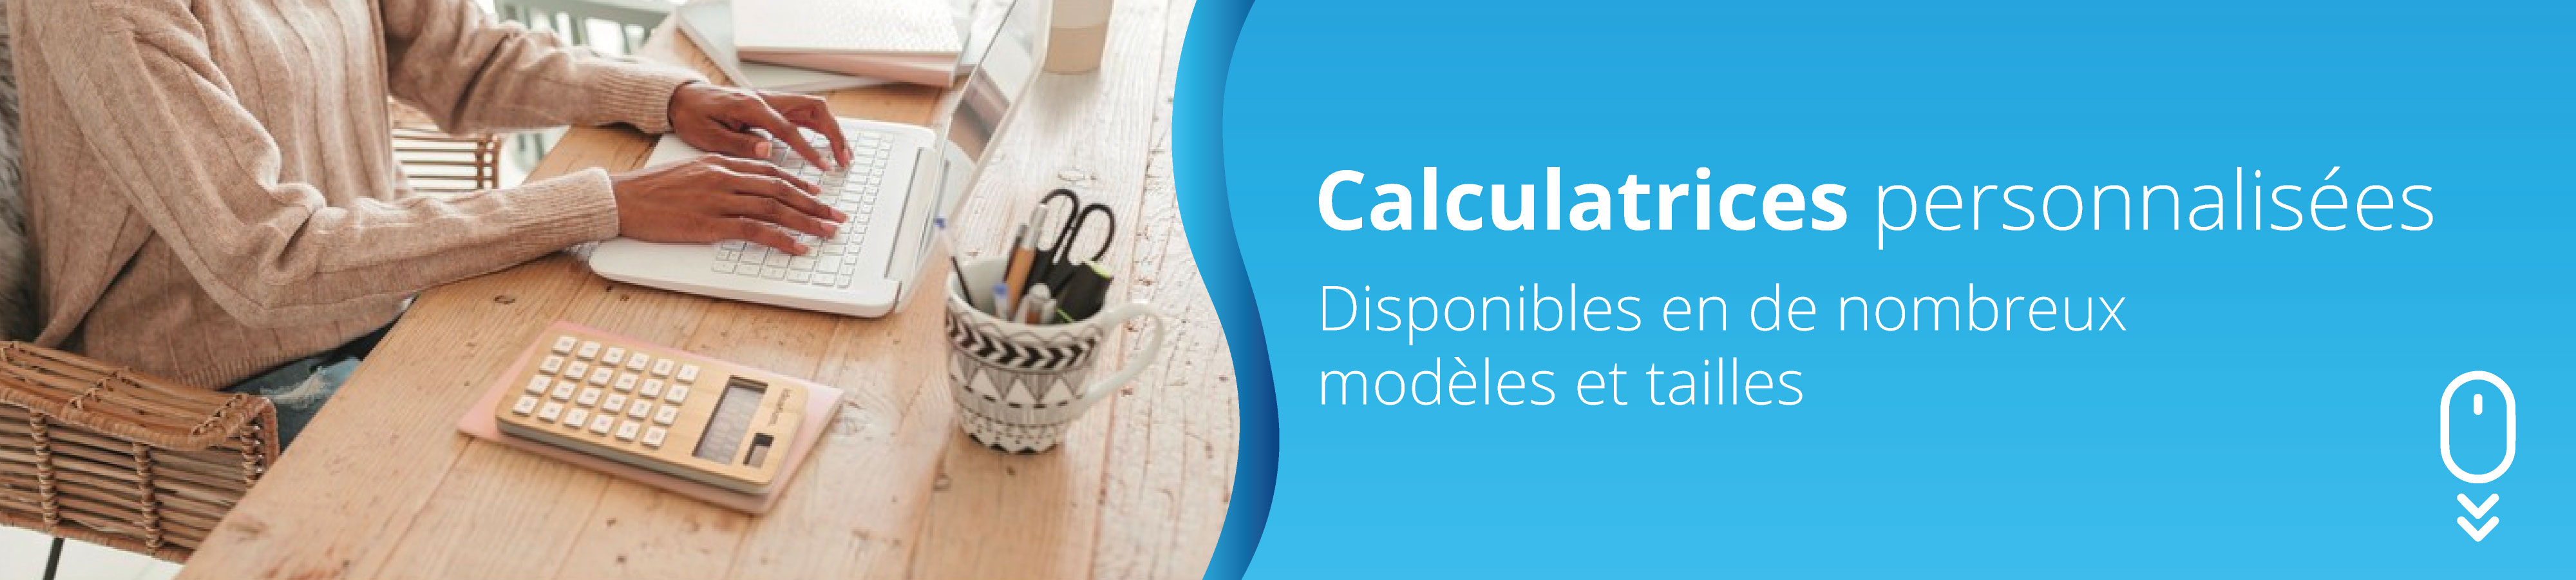 calculatrices-personnalisees